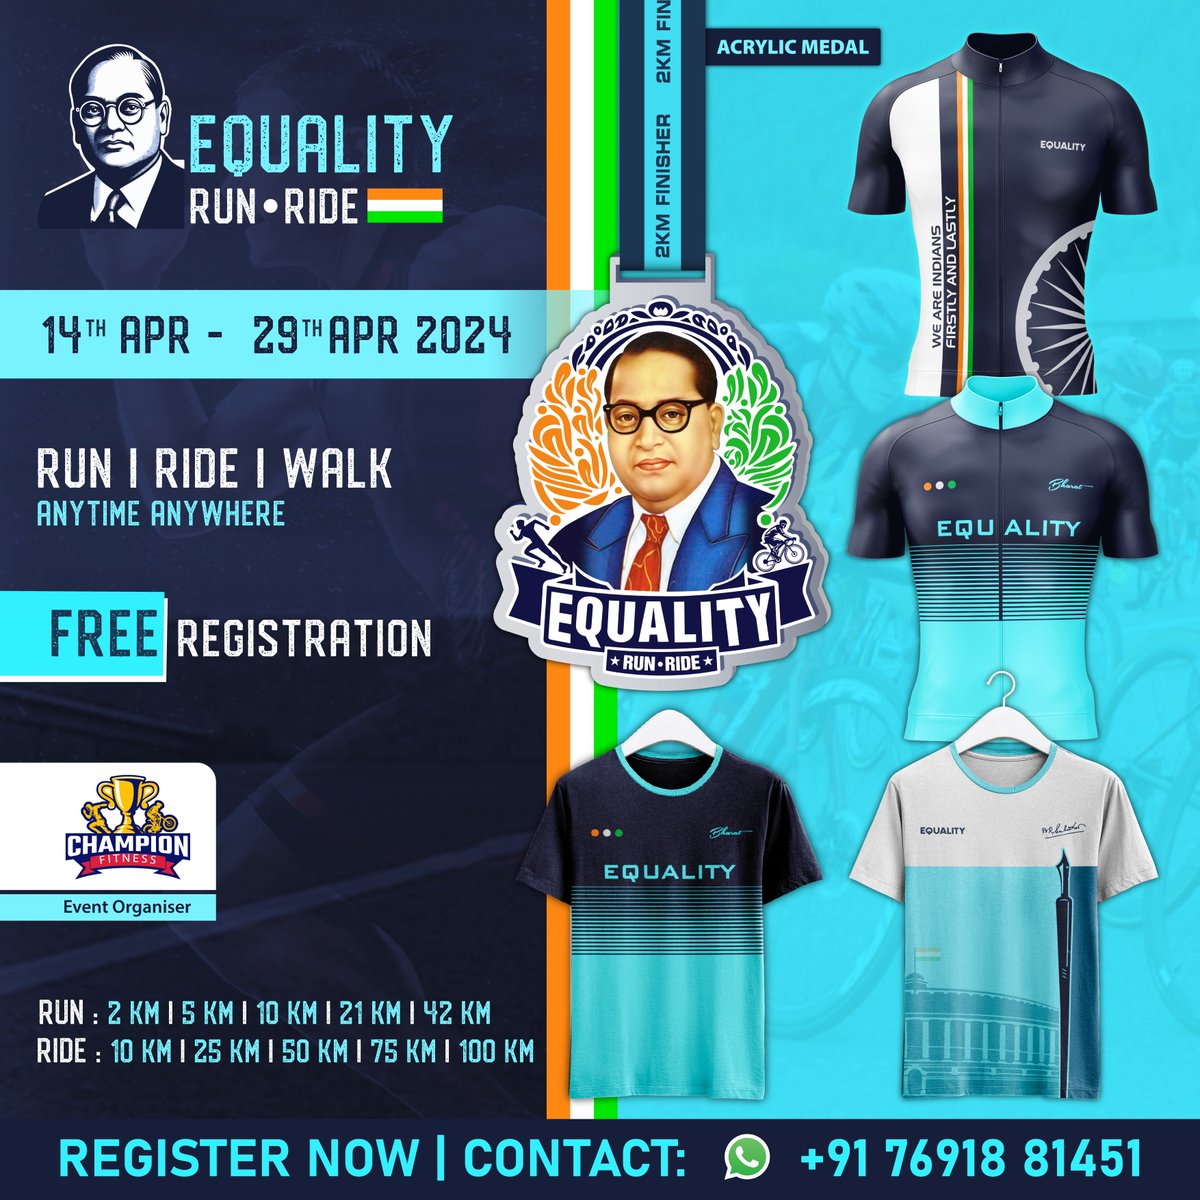 Join this virtual event ‘Equality Run - Ride 2024’ to pay tribute to #BhimraoAmbedkarJi, who was one of the architects of the Indian Constitution, and achieve your fitness goals with this event.  
#BRAmbedkar 

Register now : bit.ly/3TTSBTM 

For Query : +91-76918 81451